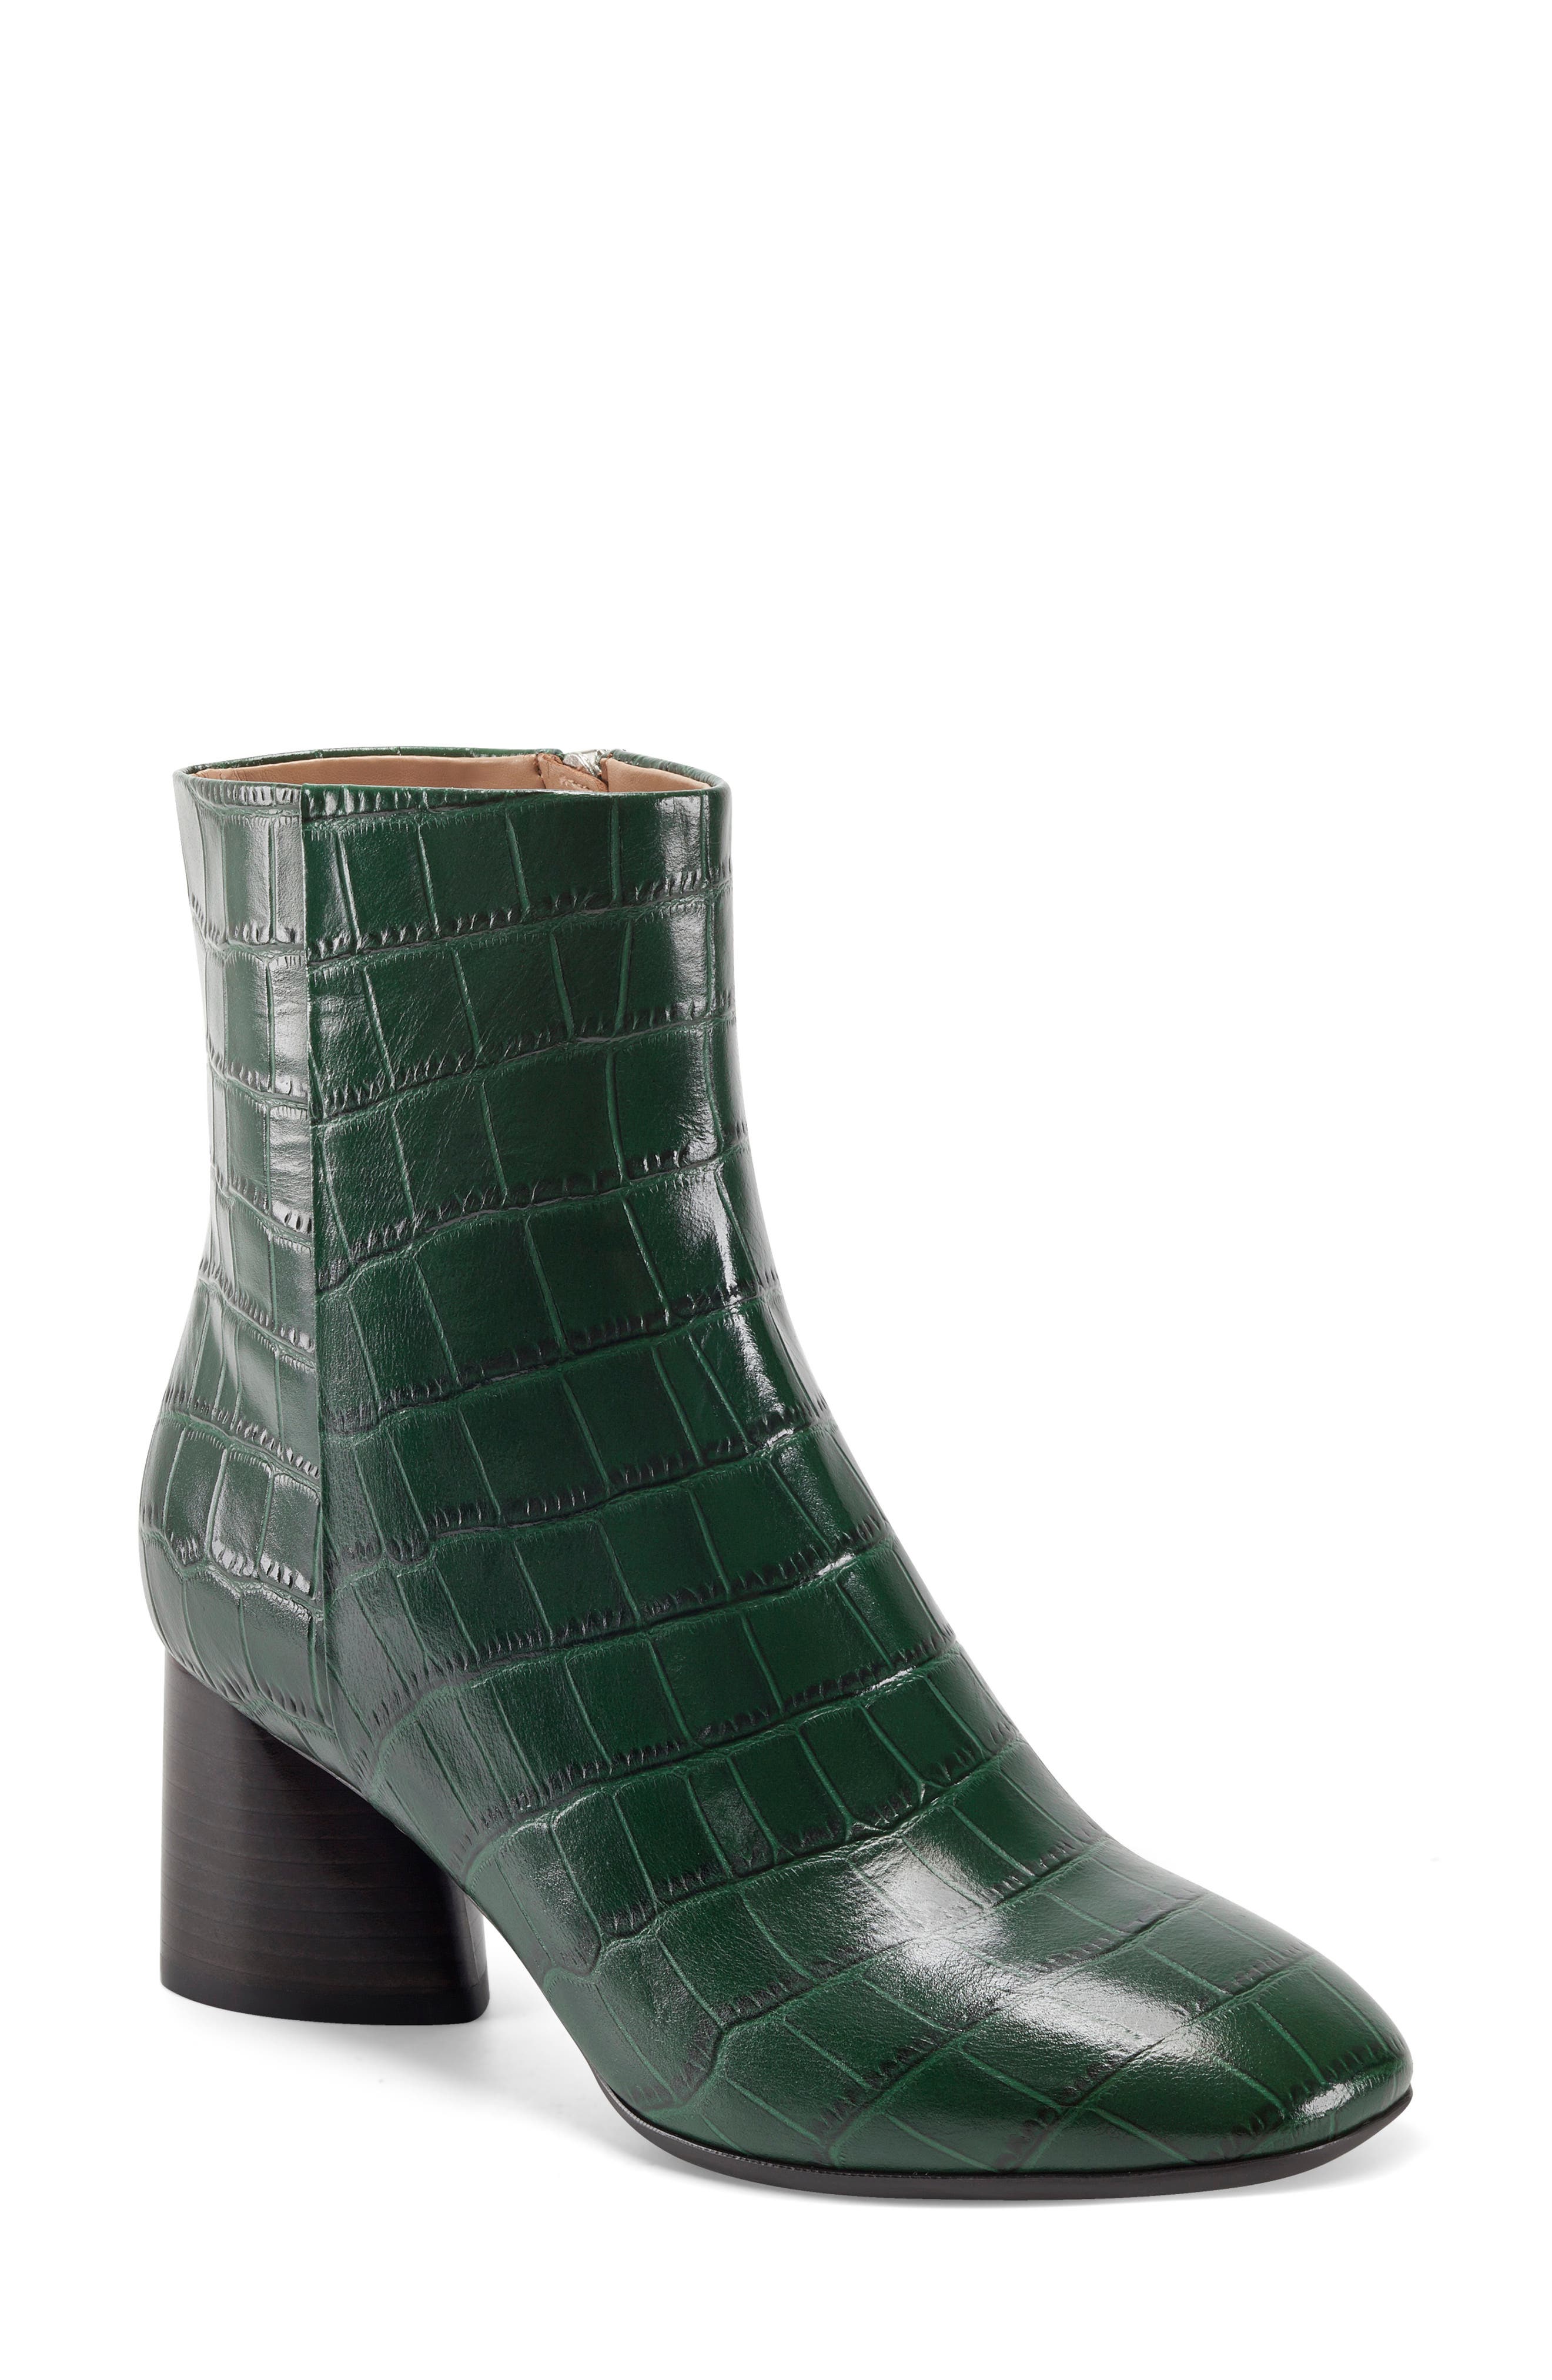 Women's Green Shoes New Arrivals: Boots 